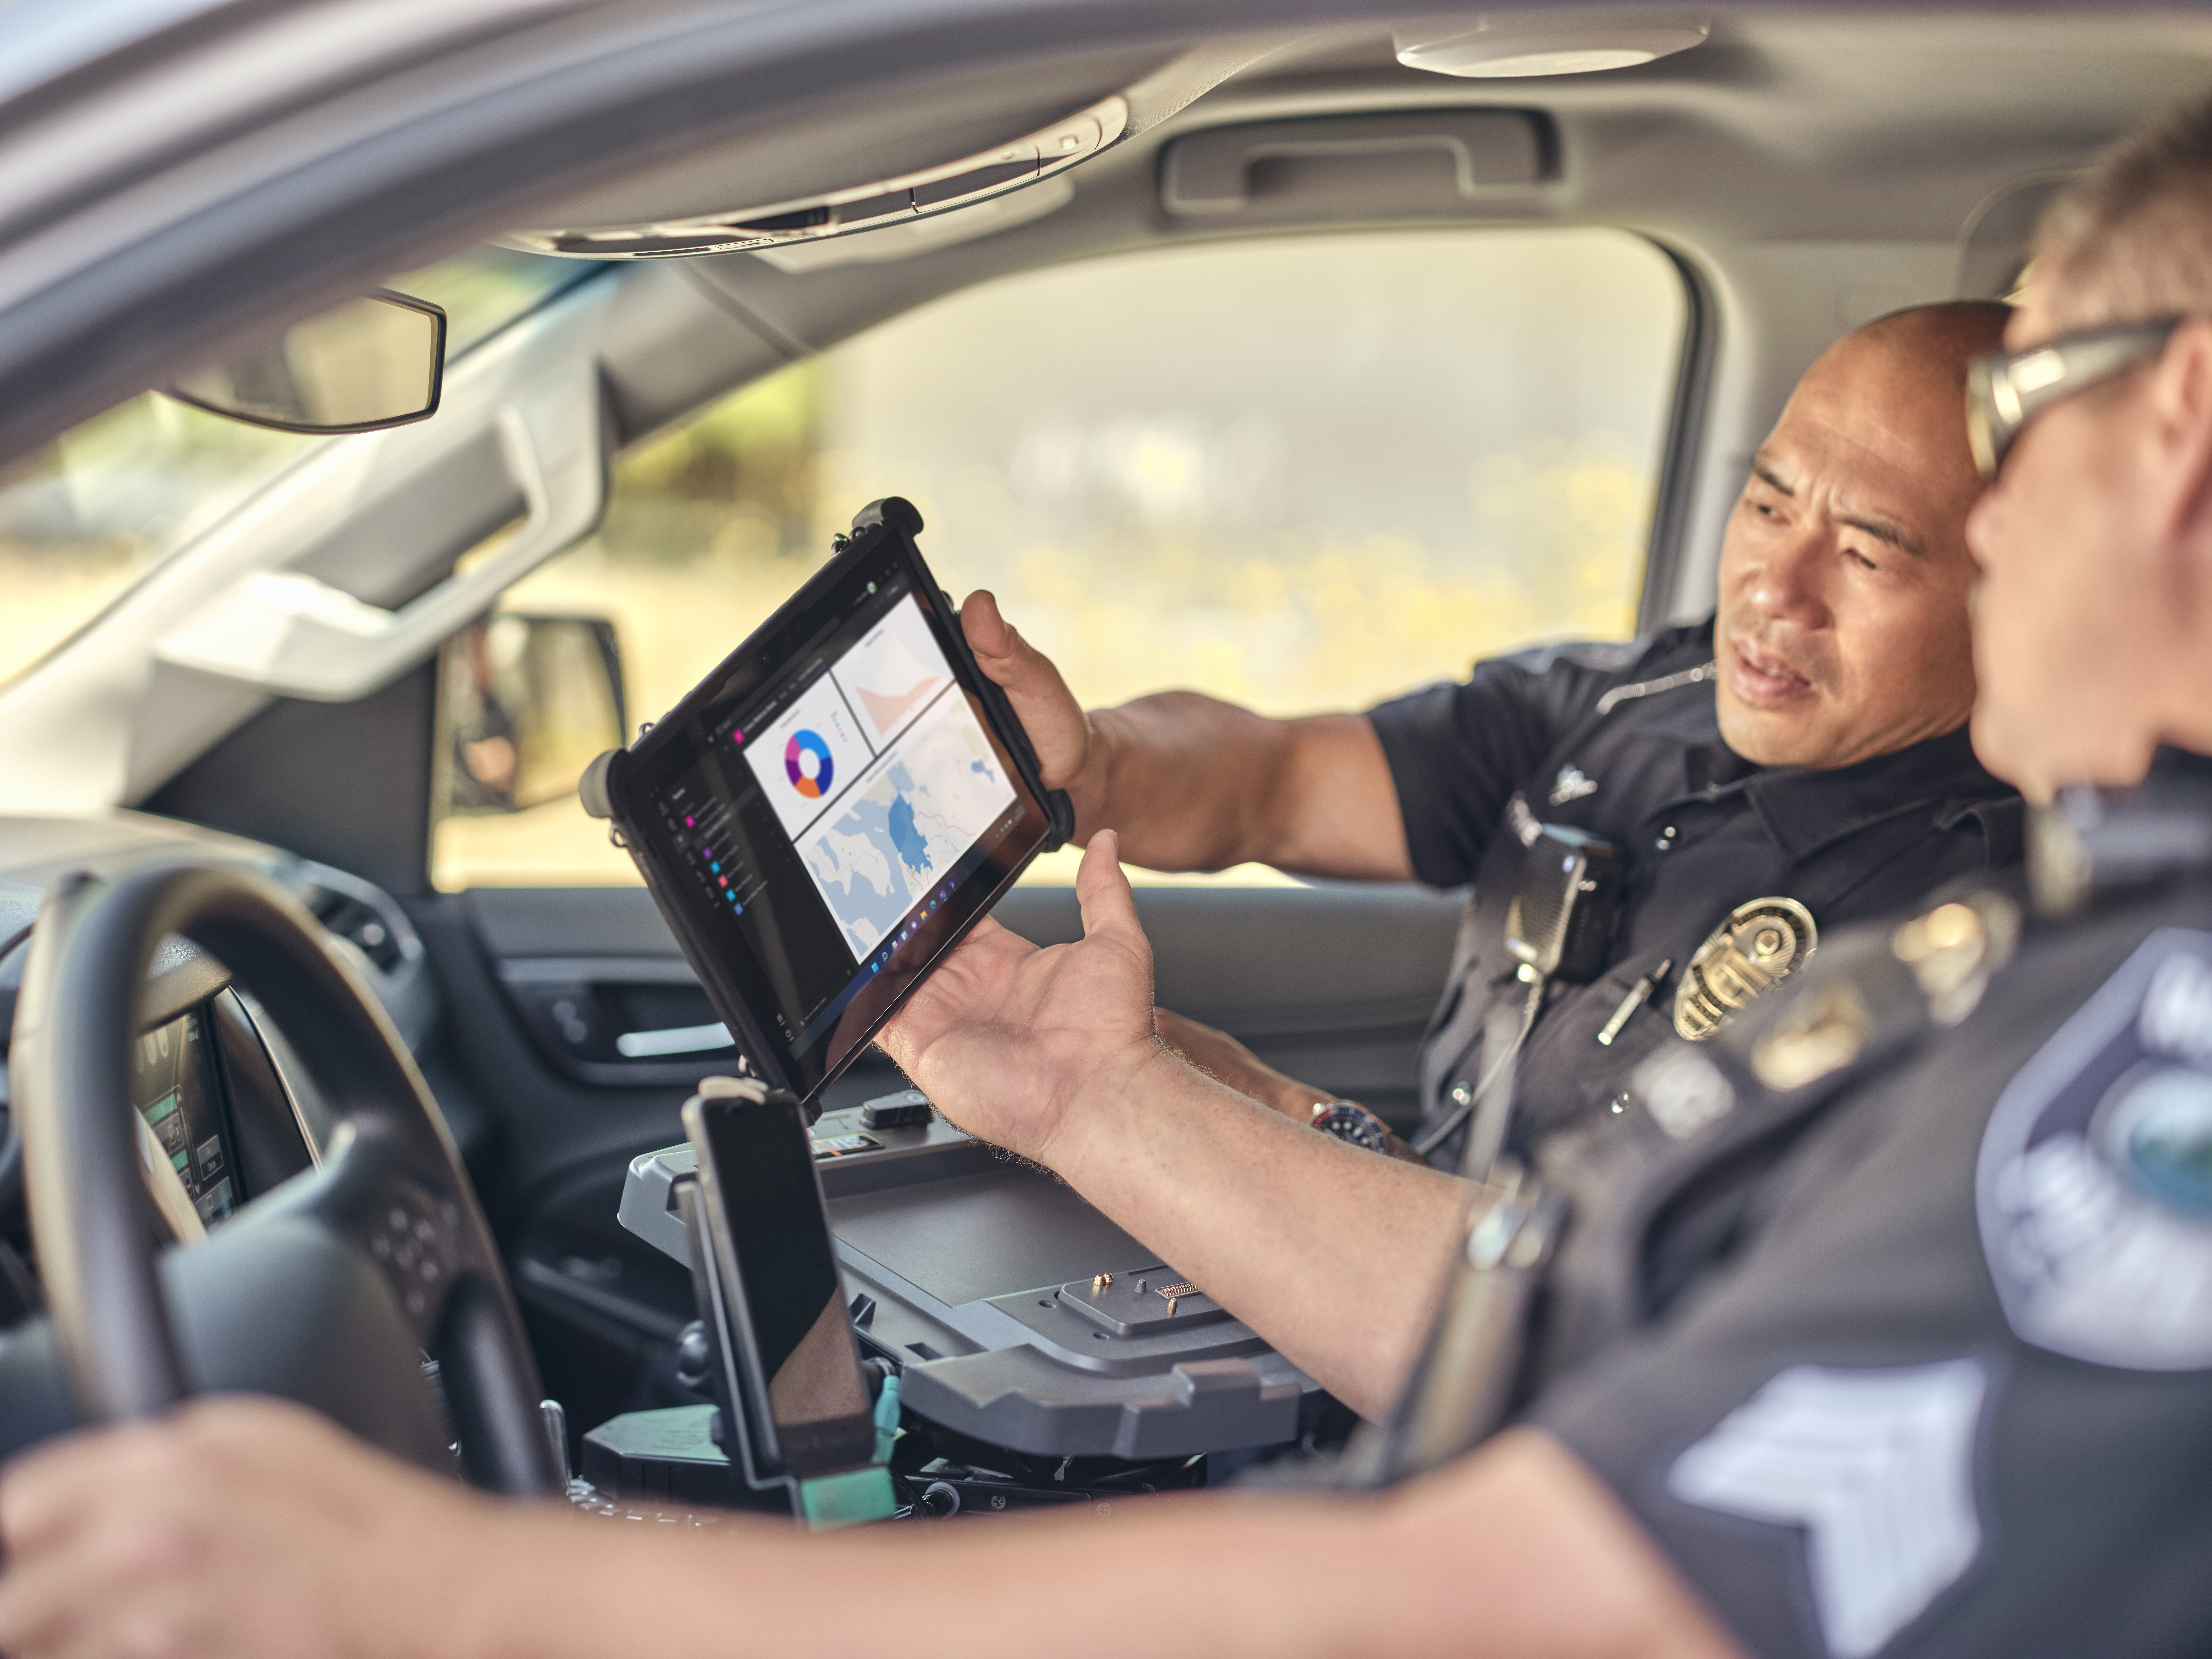 Two middle-aged, male law enforcement officers (one wearing glasses, and the other is balding) are sitting in a patrol car and looking at a hand-held tablet that is displaying public safety data.